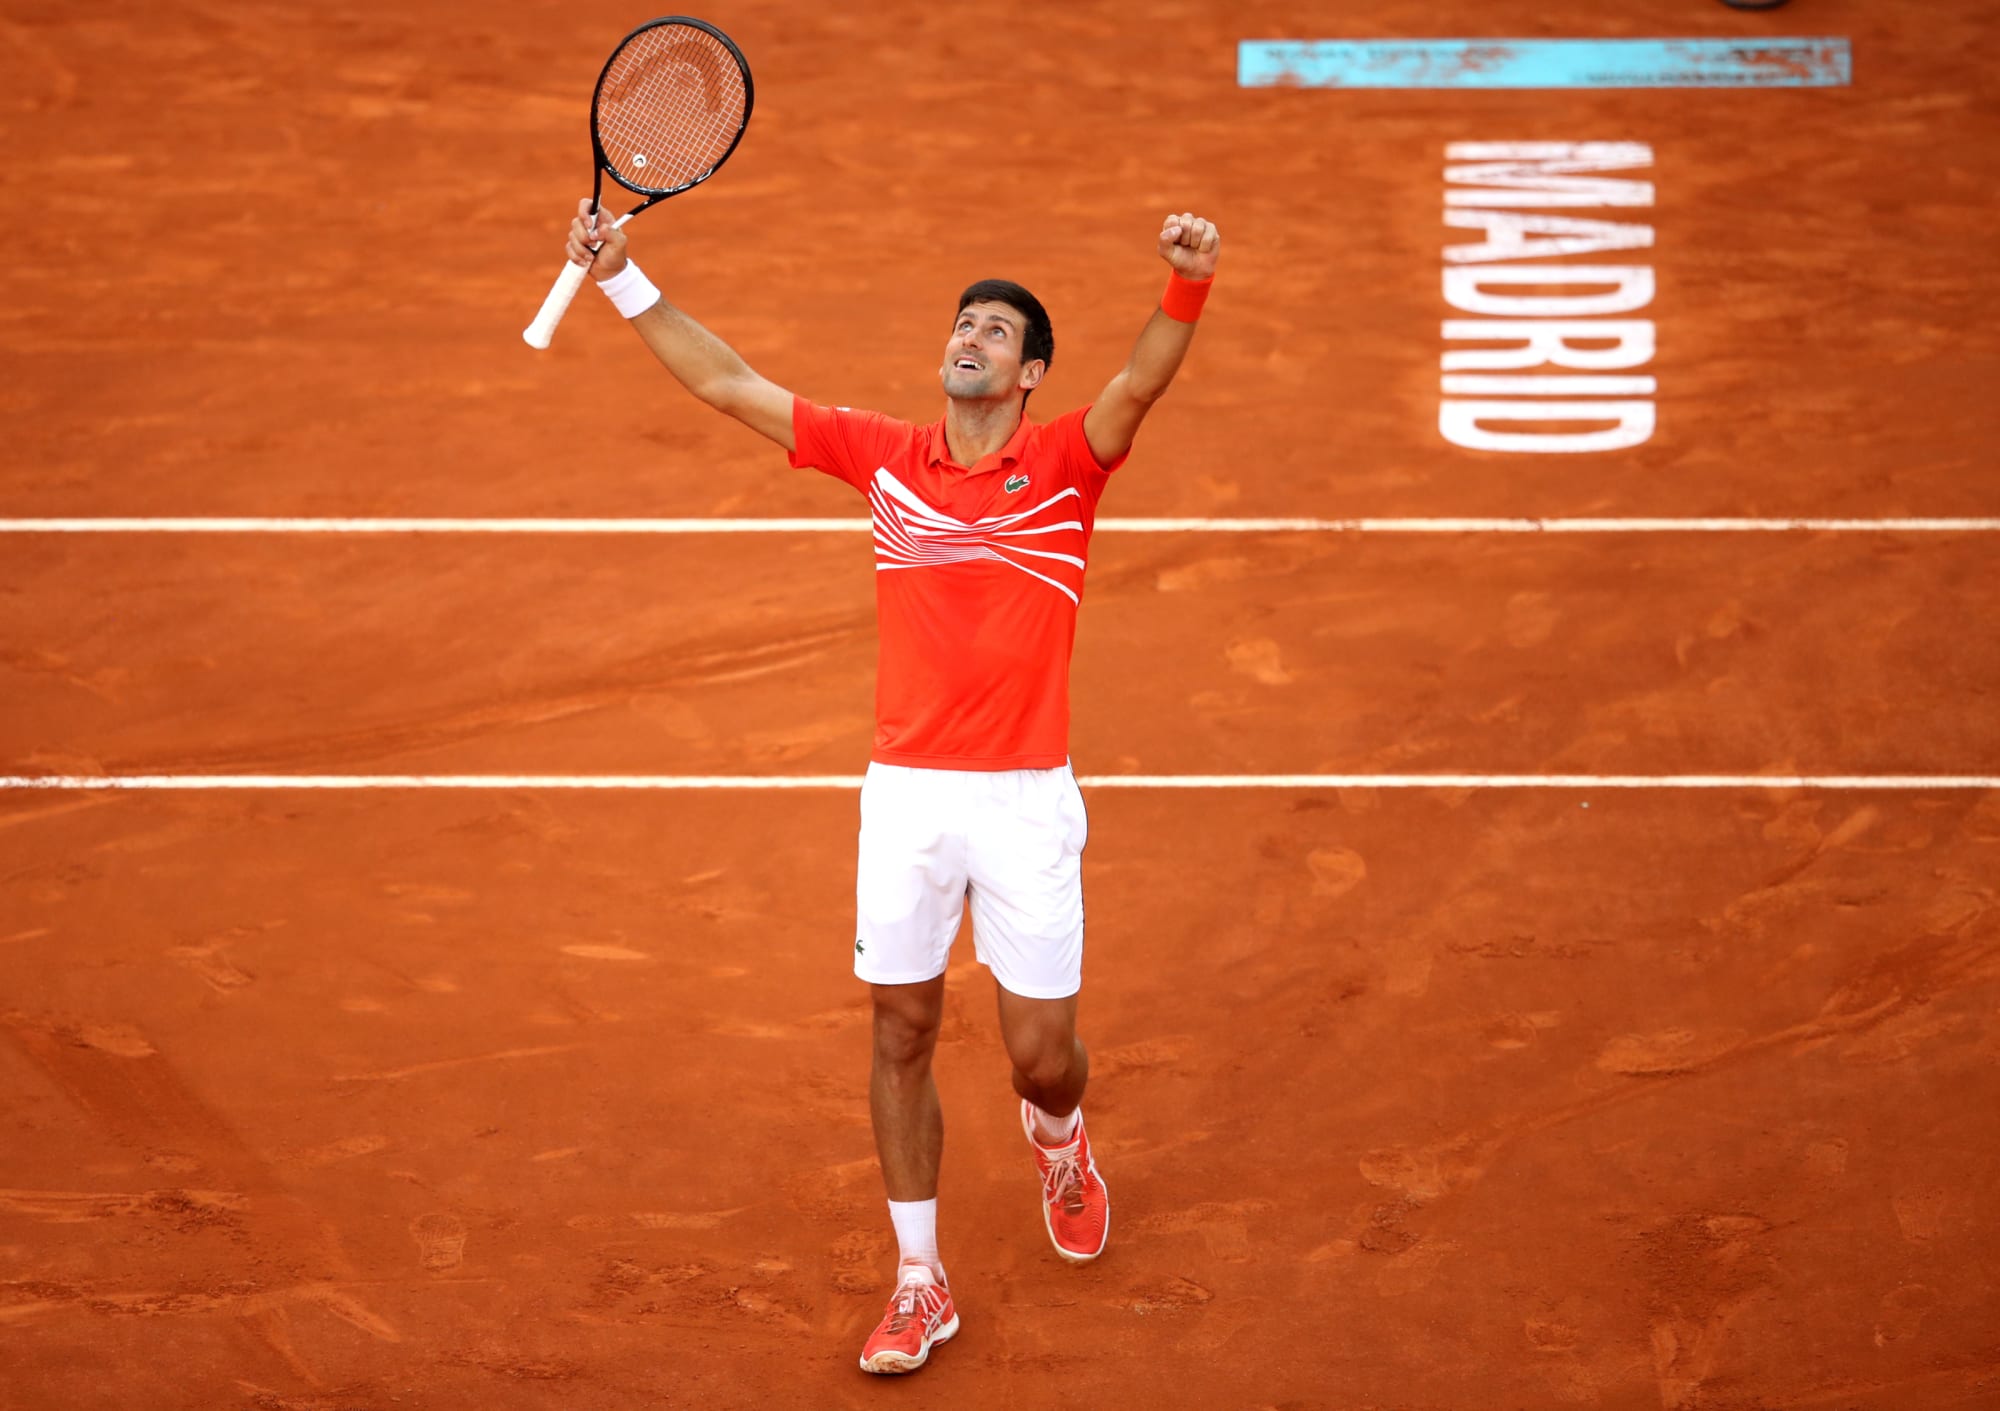 Novak Djokovic continues to make history at the Madrid Open